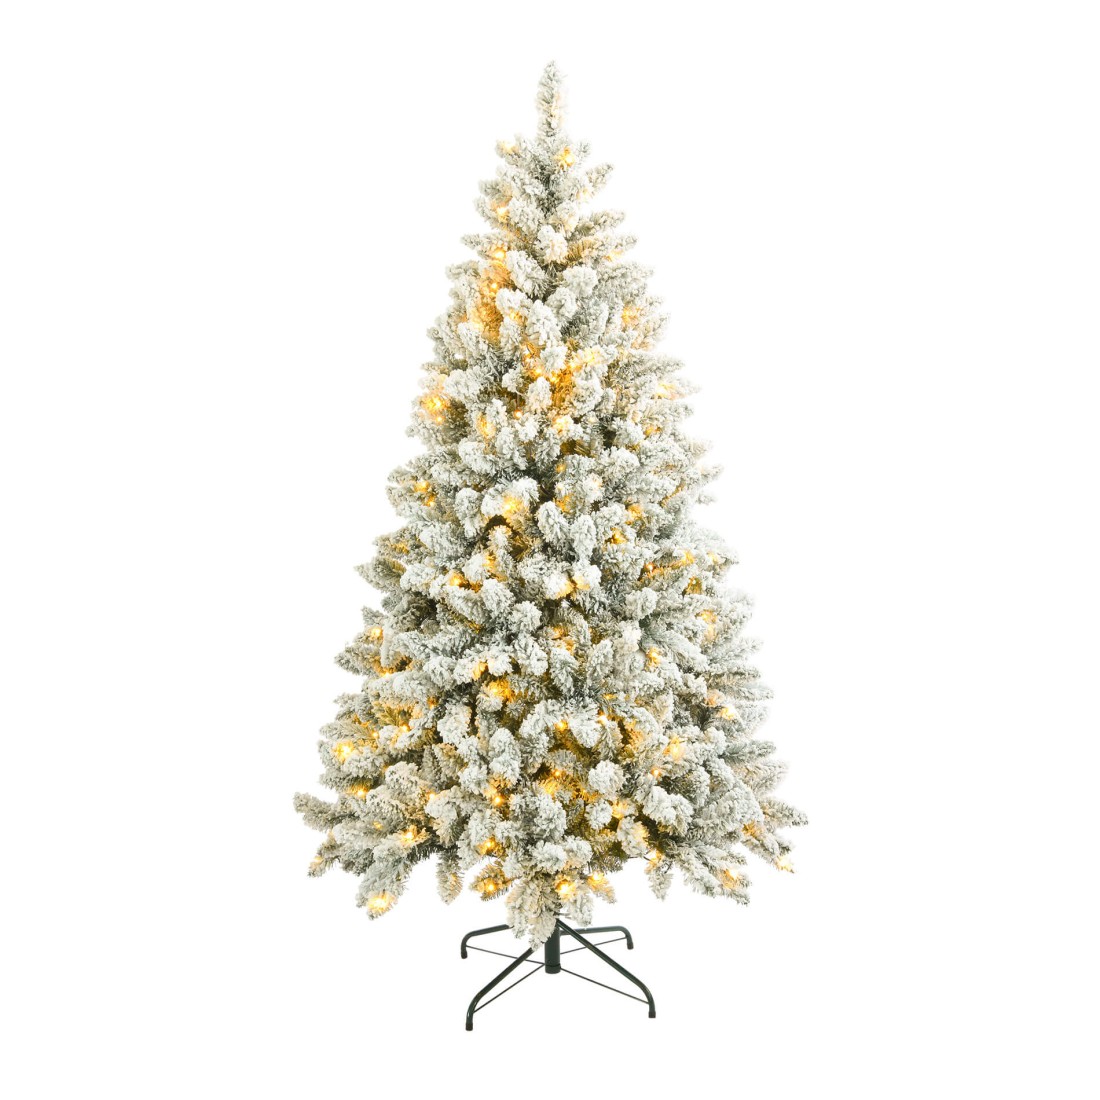 Snow-covered Christmas tree with led lights included